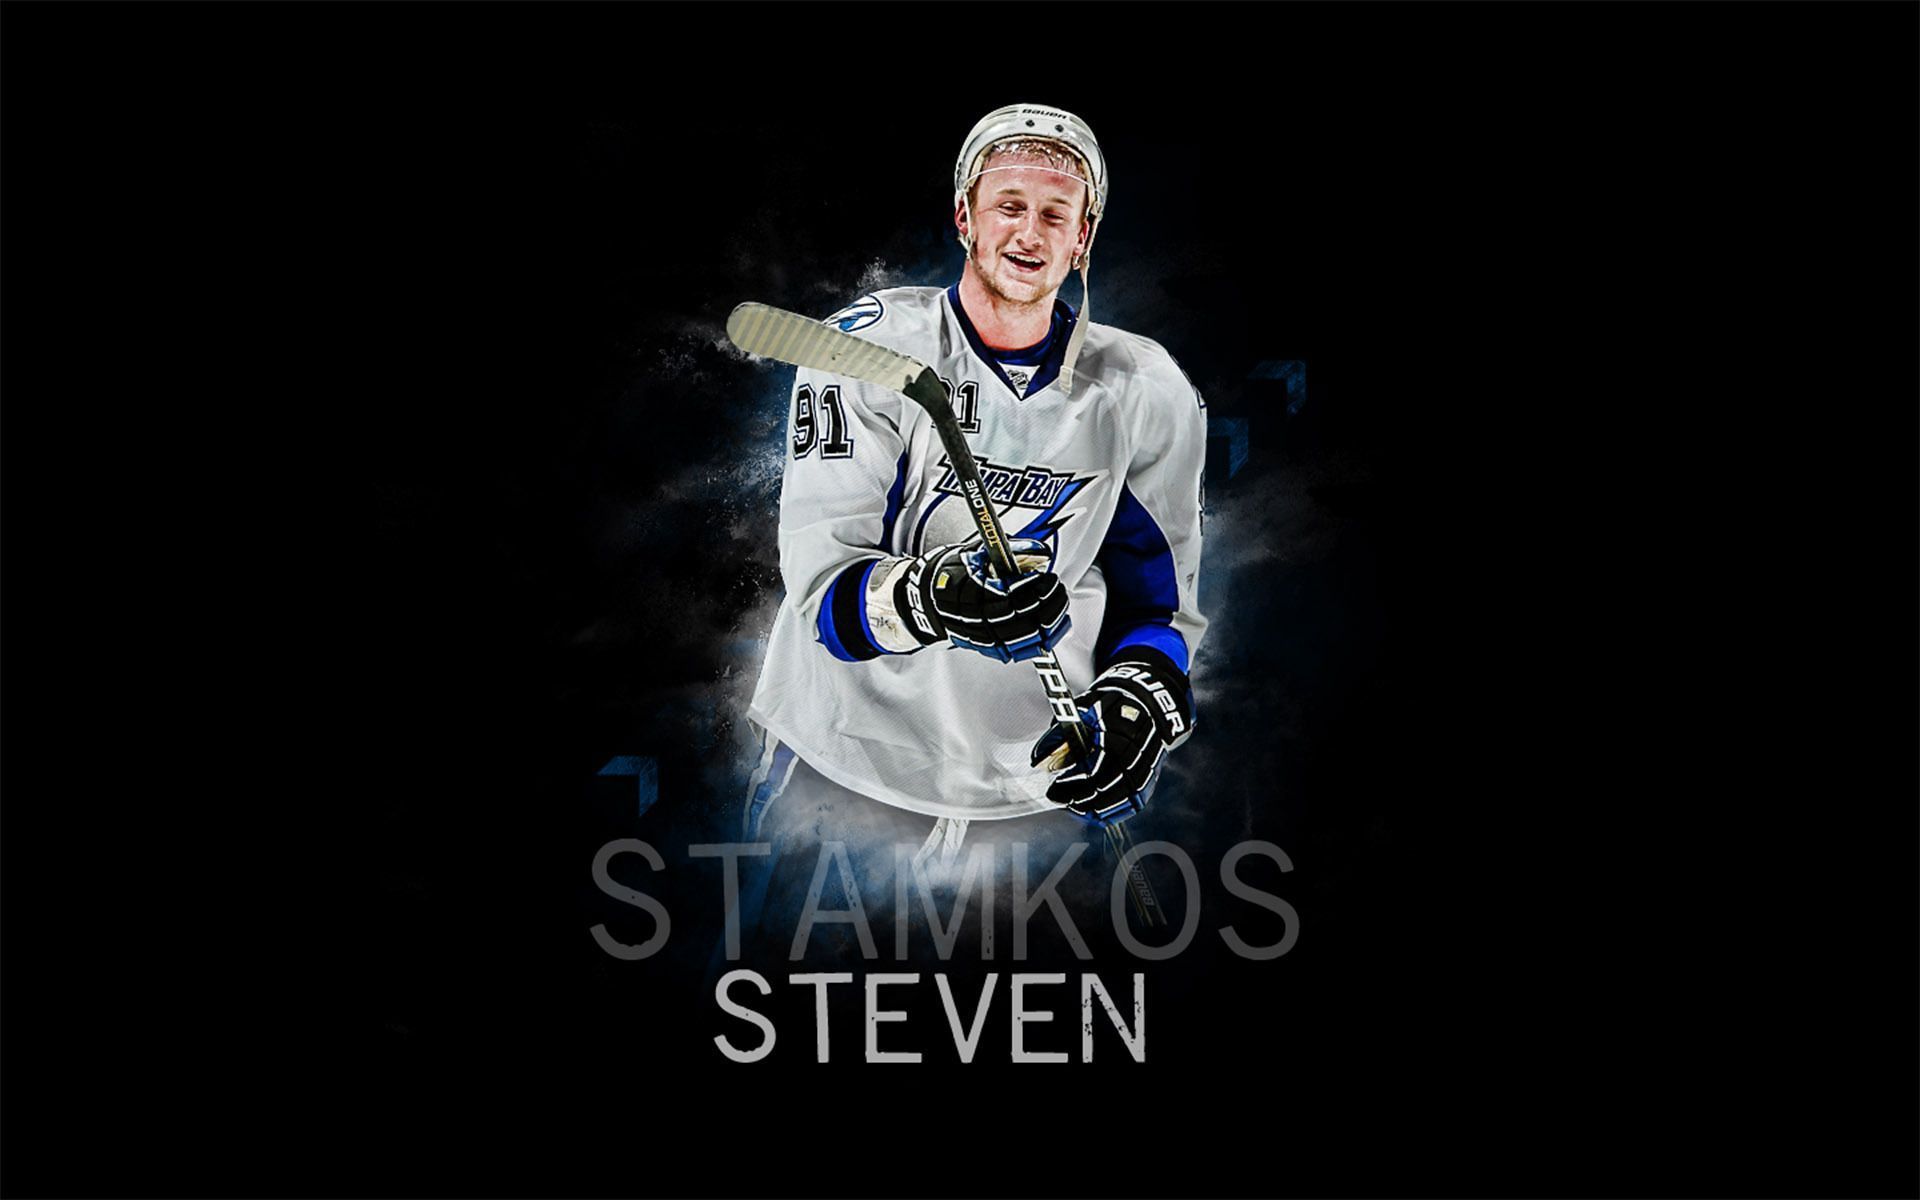 NHL player Steven Stemkos wallpapers and images - wallpapers ...